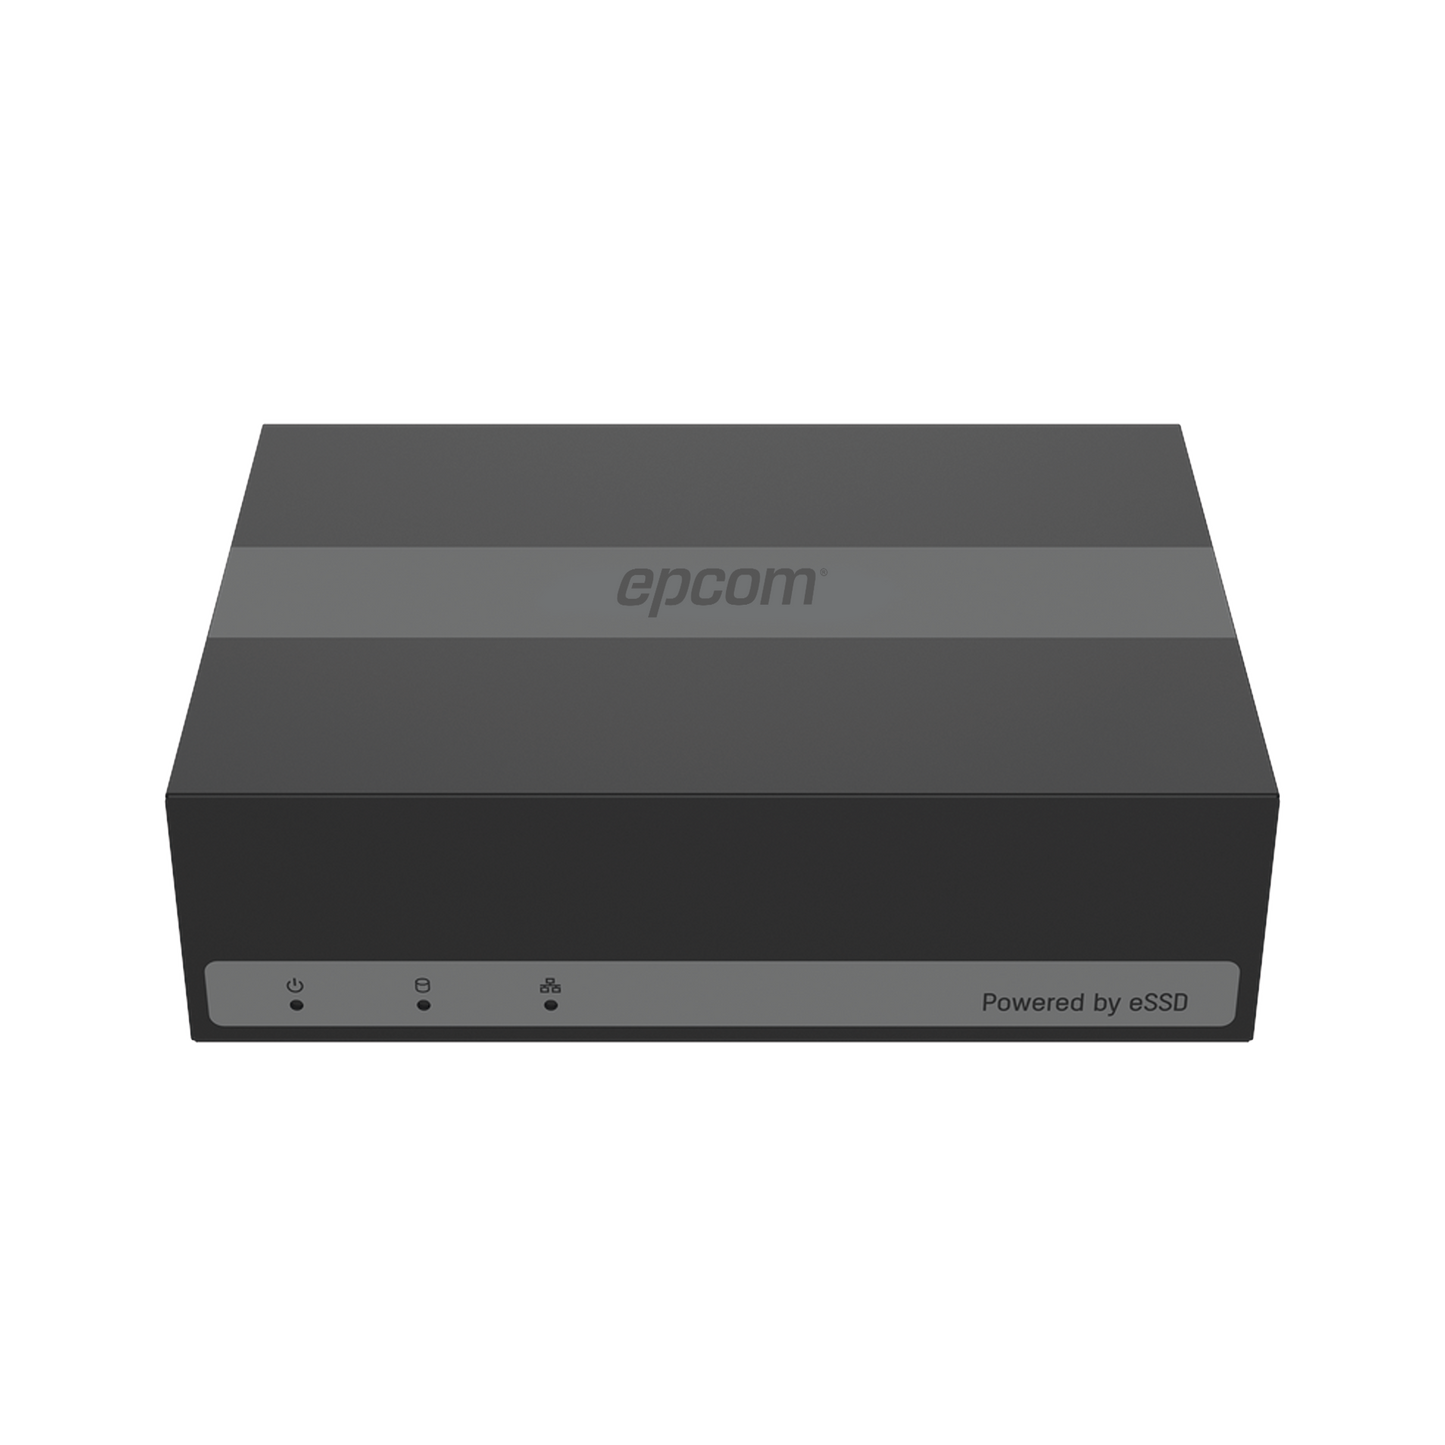 DVR 2 Megapixel (1080o) Lite / 4 Channel TURBOHD + 1 IP Channel / eSSD Drive Included (300 GB) / H.265+ / ACUSENSE Lite / Ultra Compact Design / Extra Silent